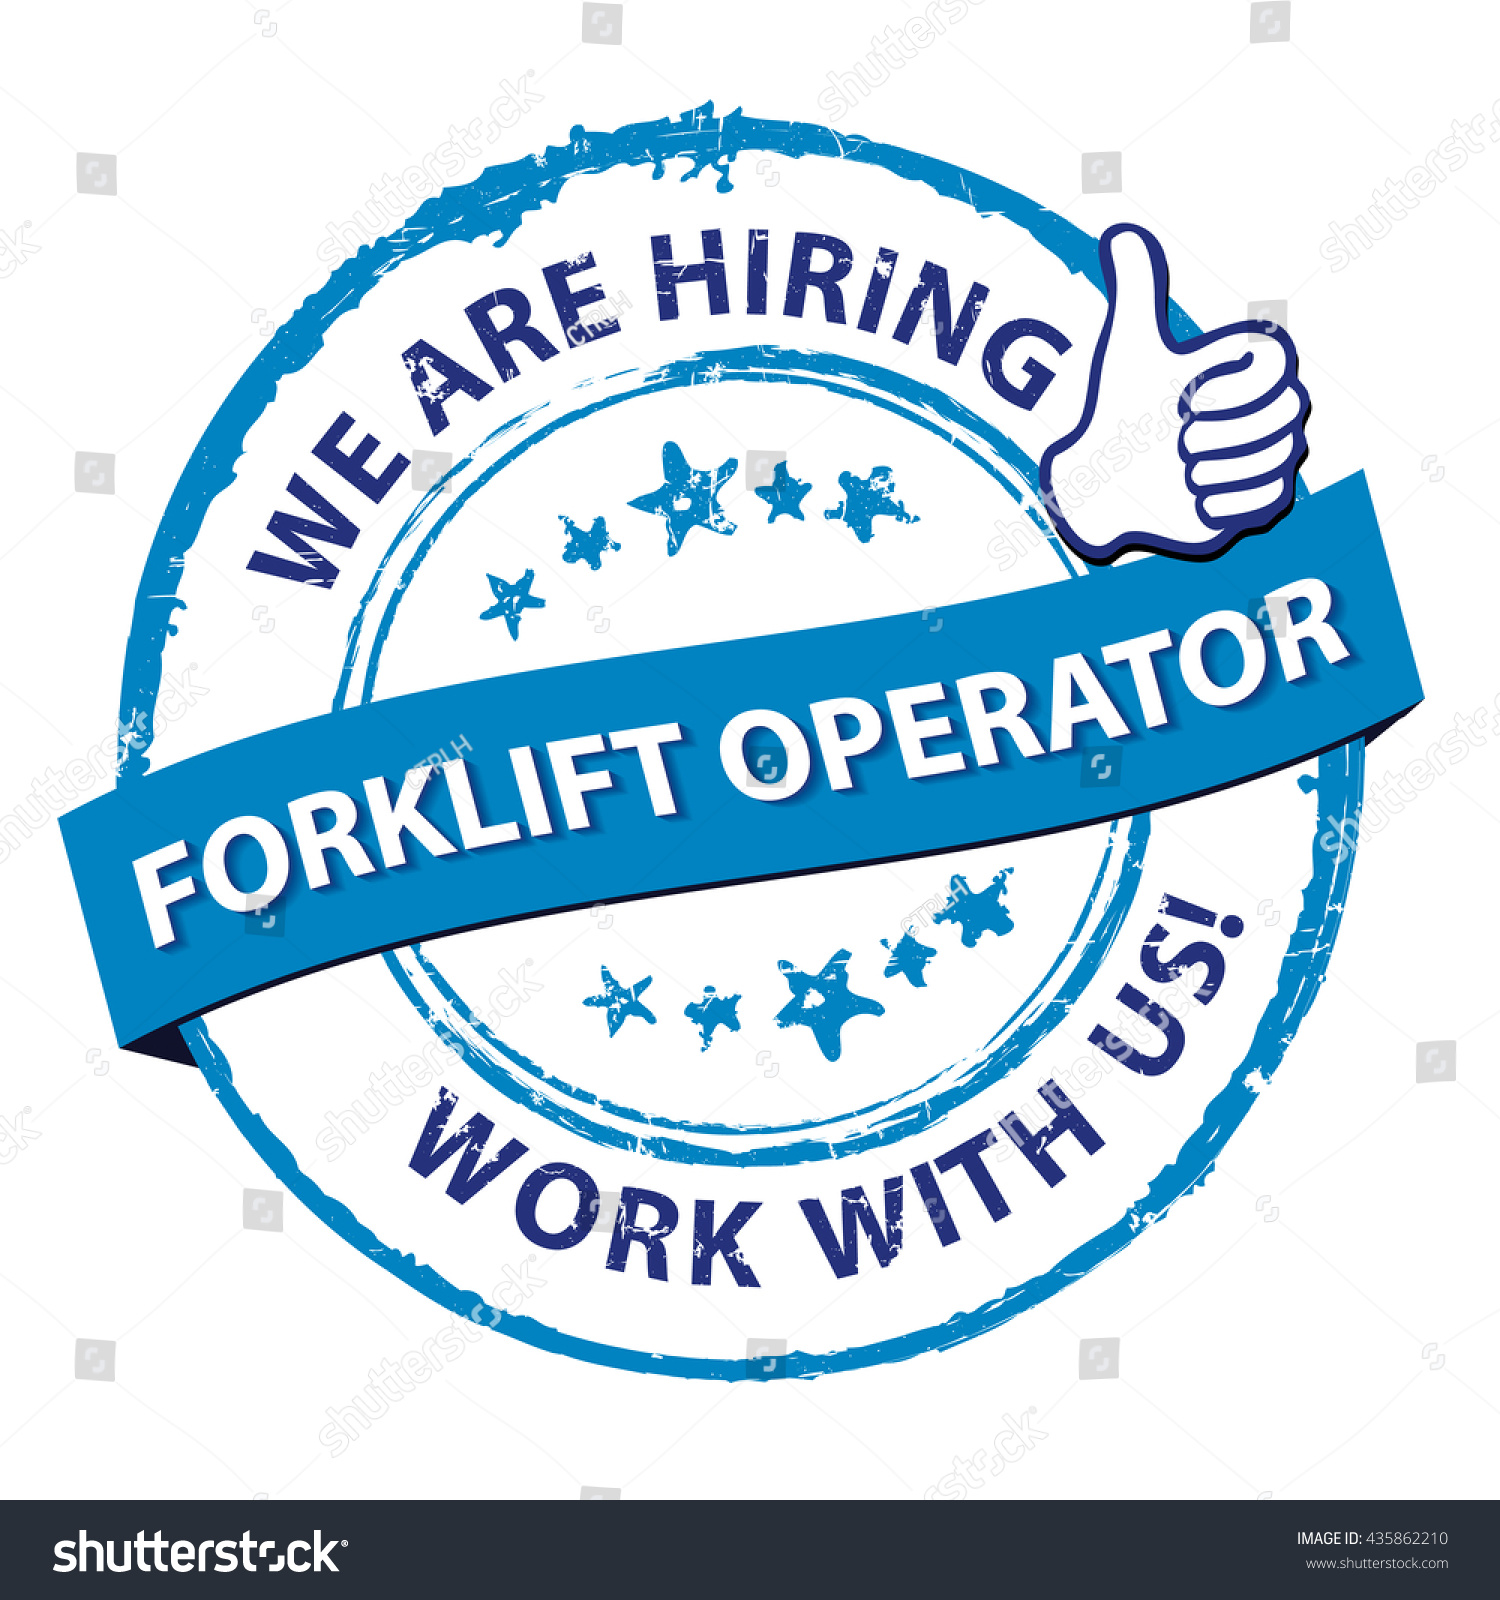 Forklift Operator Hiring Apply Now Blue Stock Vector Royalty Free 435862210